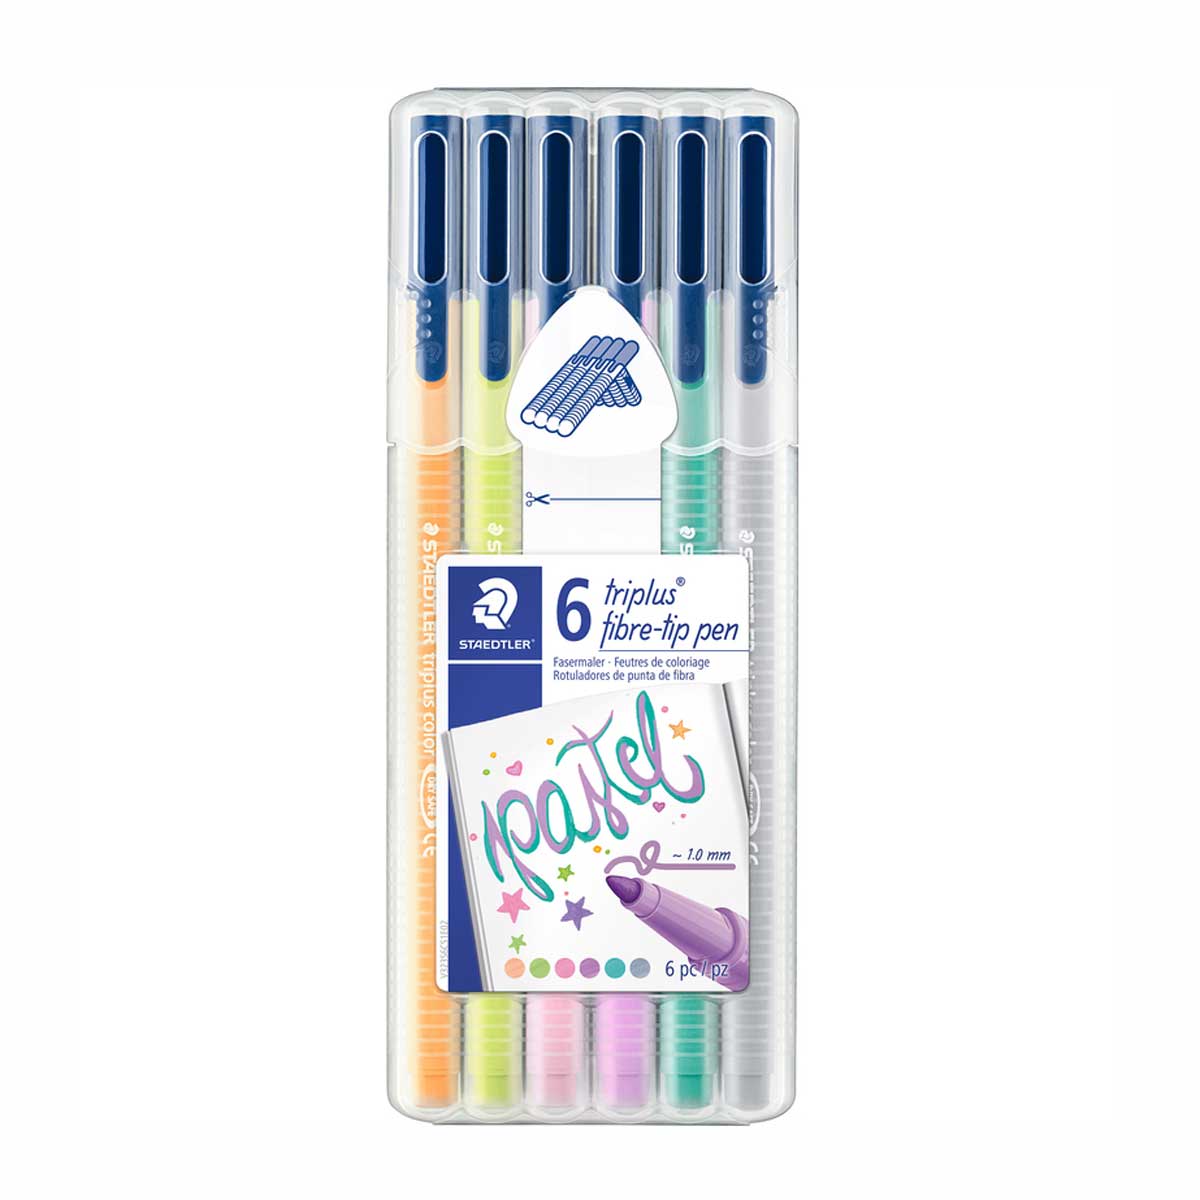 Rotuladores staedtler Triplus 10 colores